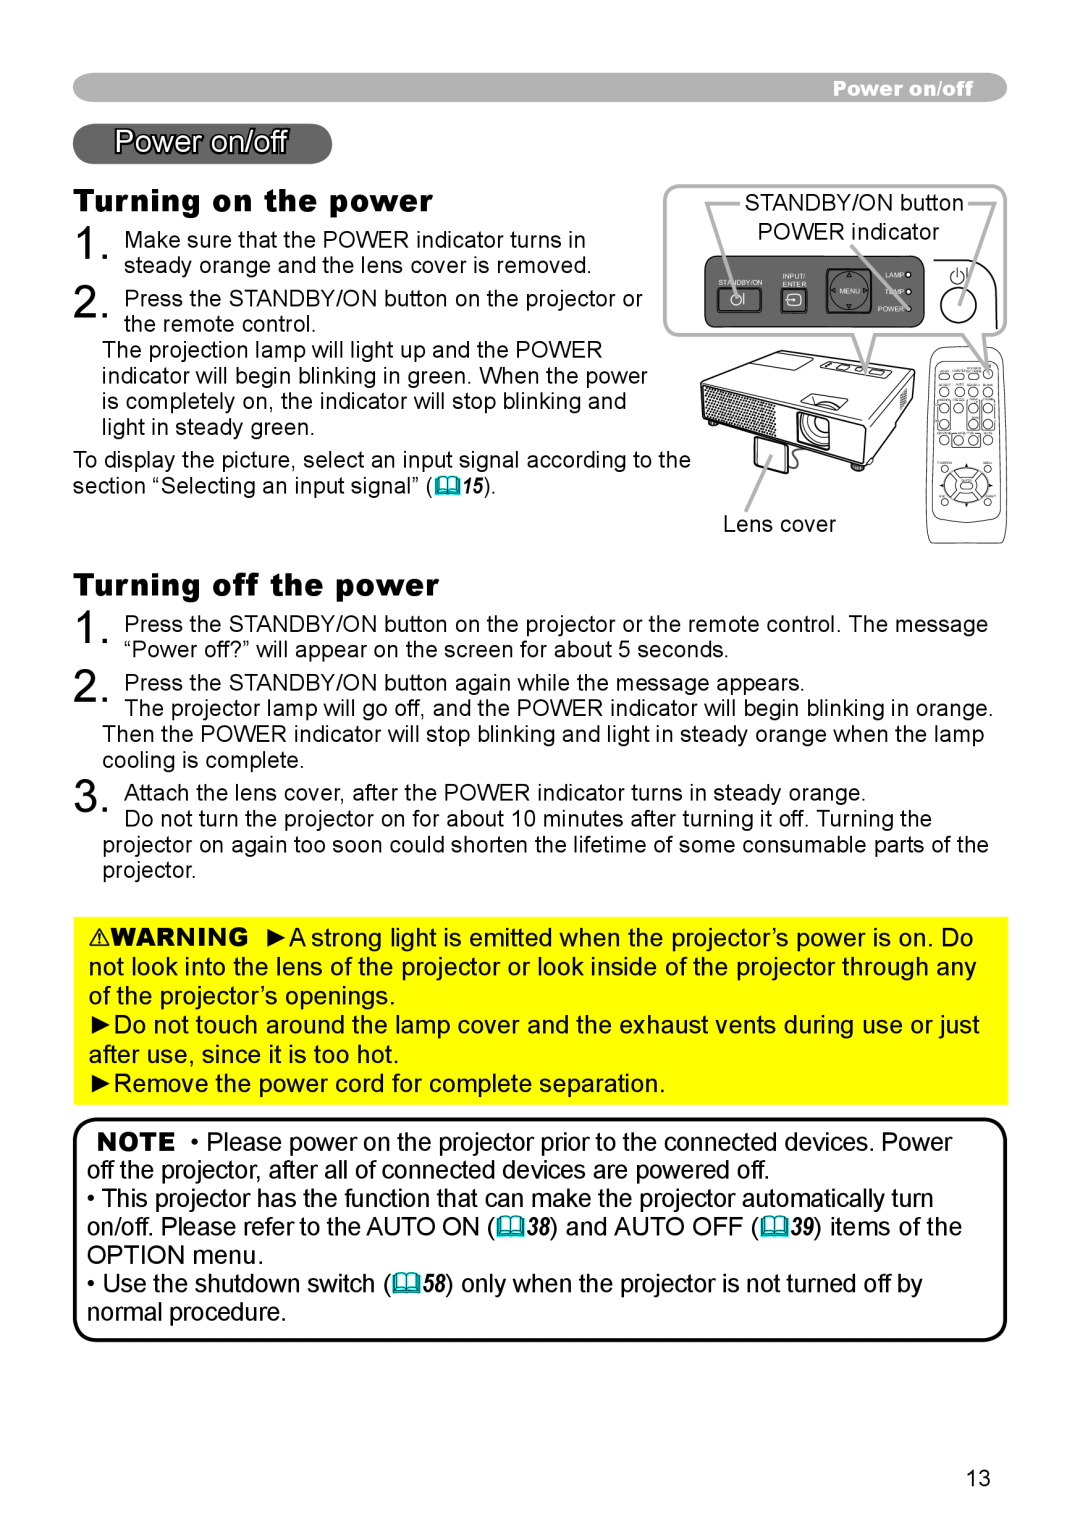 Dukane 8783 user manual Power on/off, Turning on the power, Turning off the power 